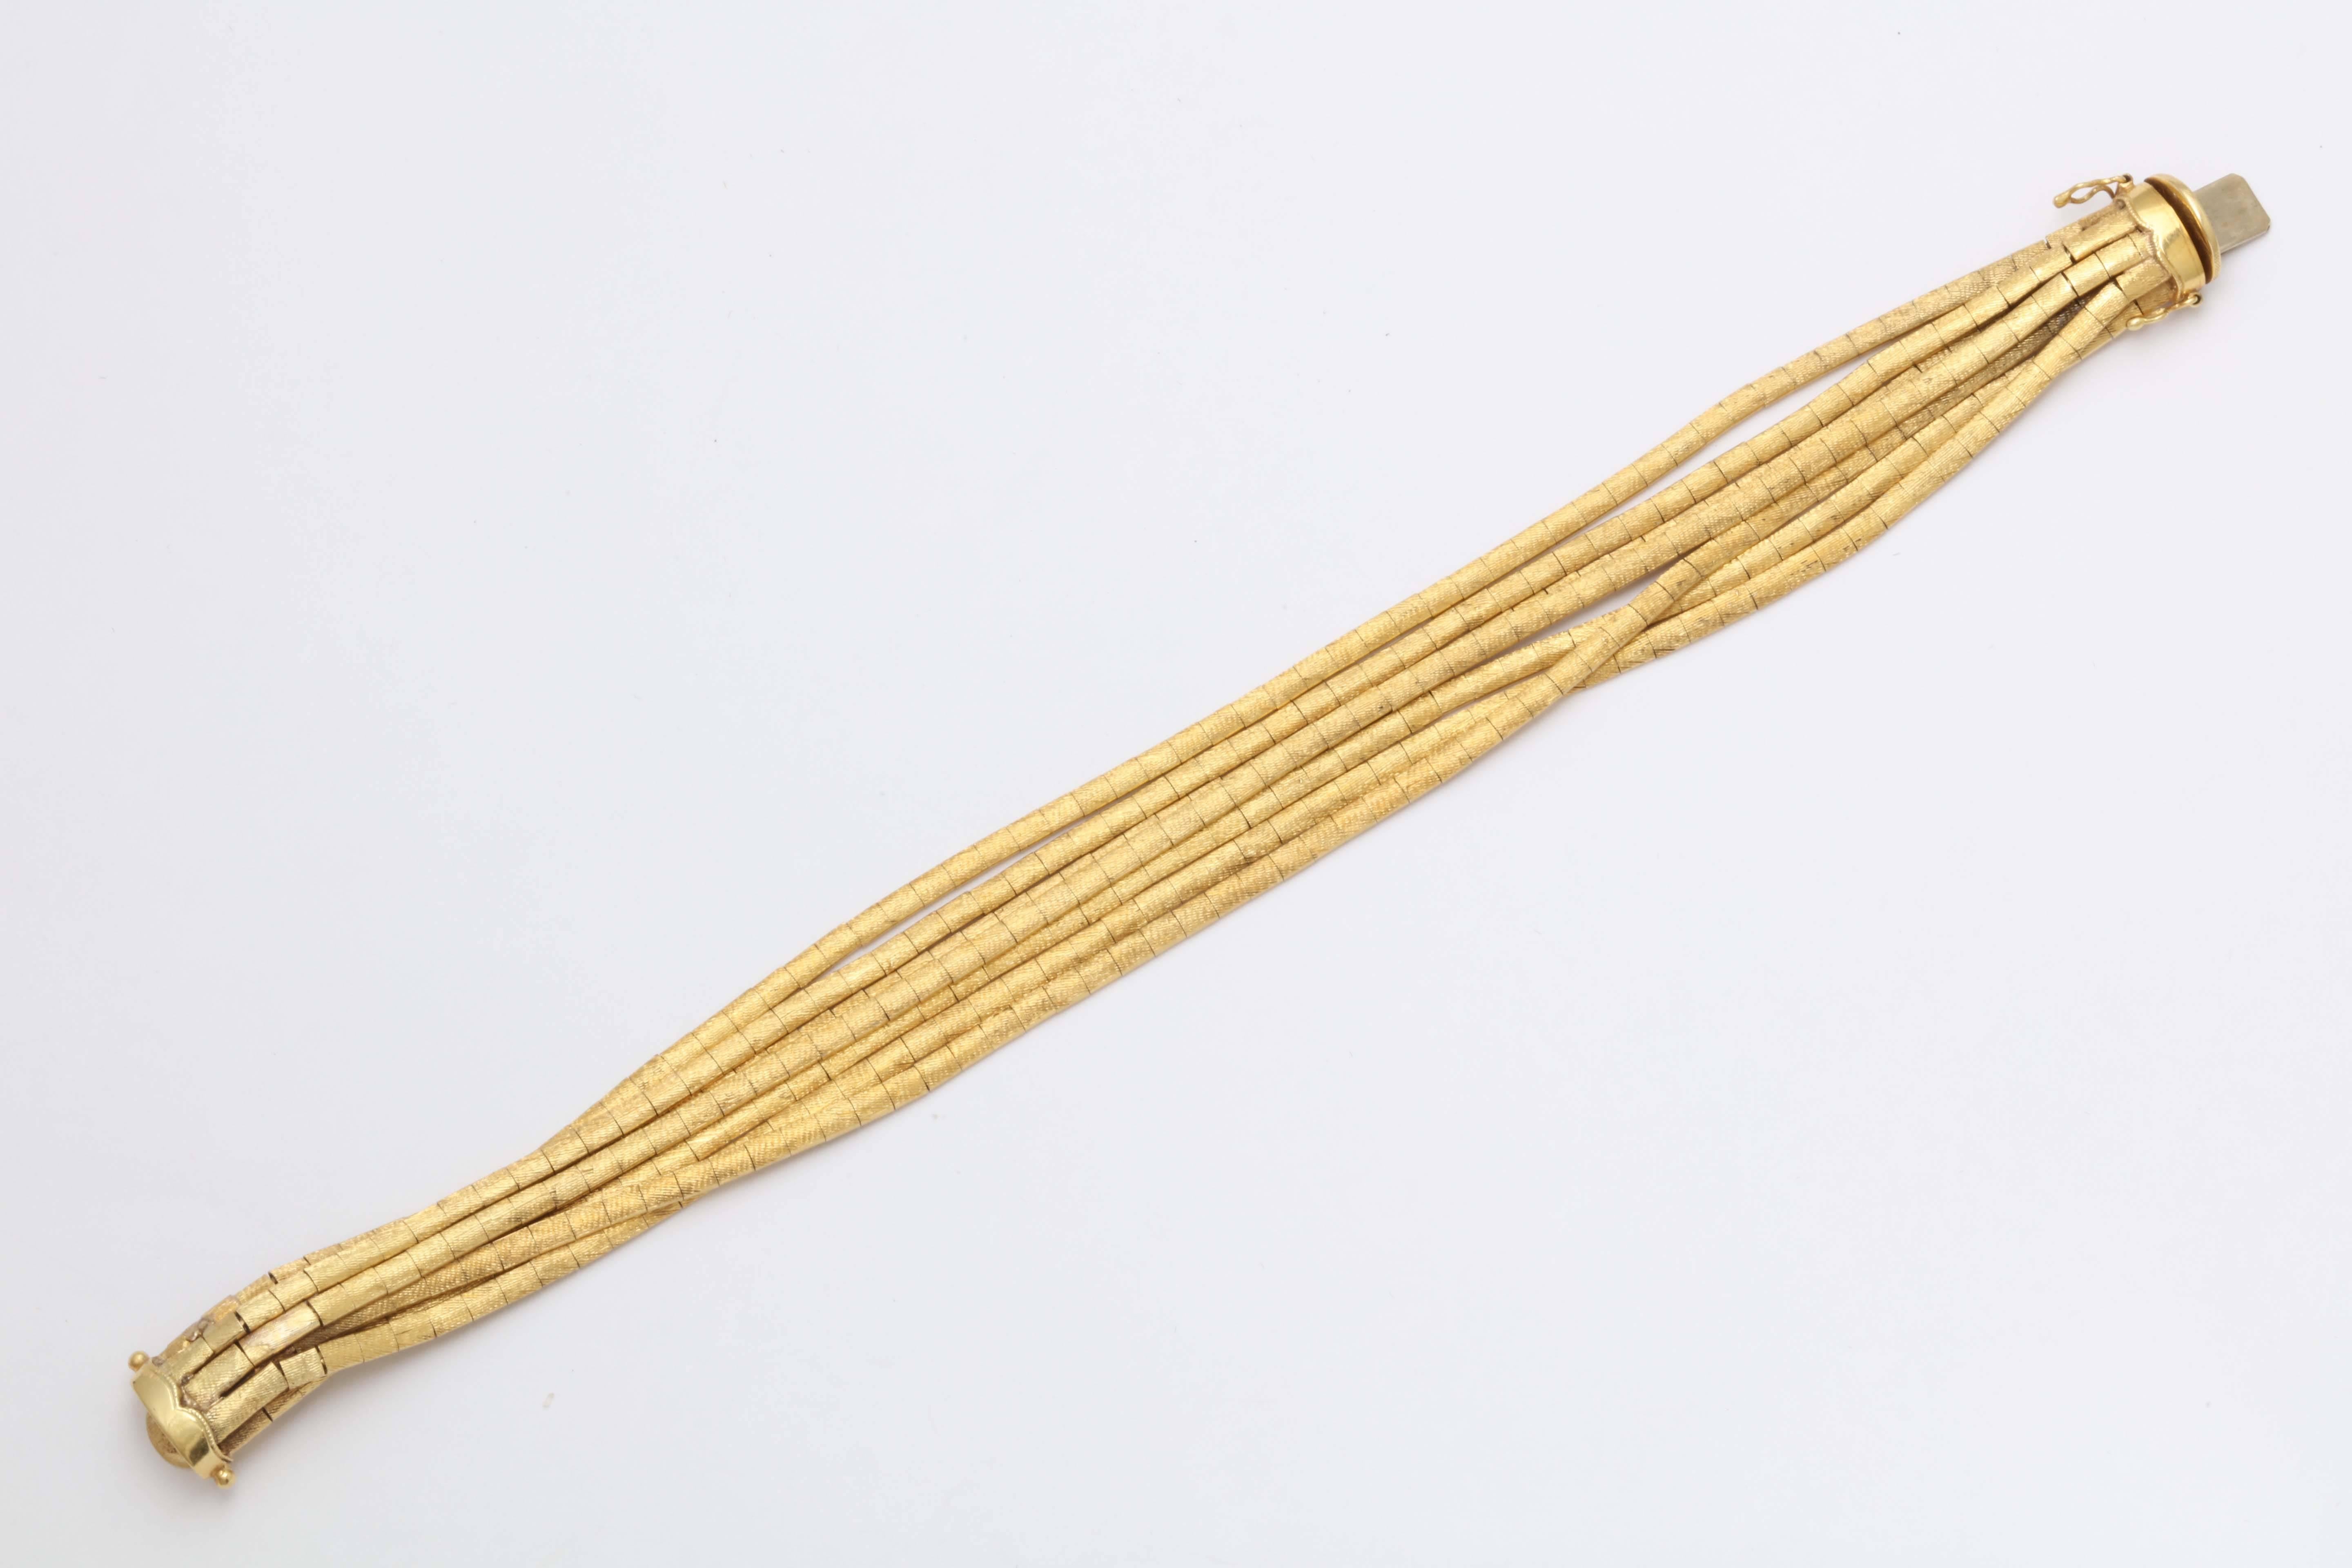 18kt - 7 link Spaghetti Bracelet.  So cool. That soft silk Bracelet that can be worn with anything.